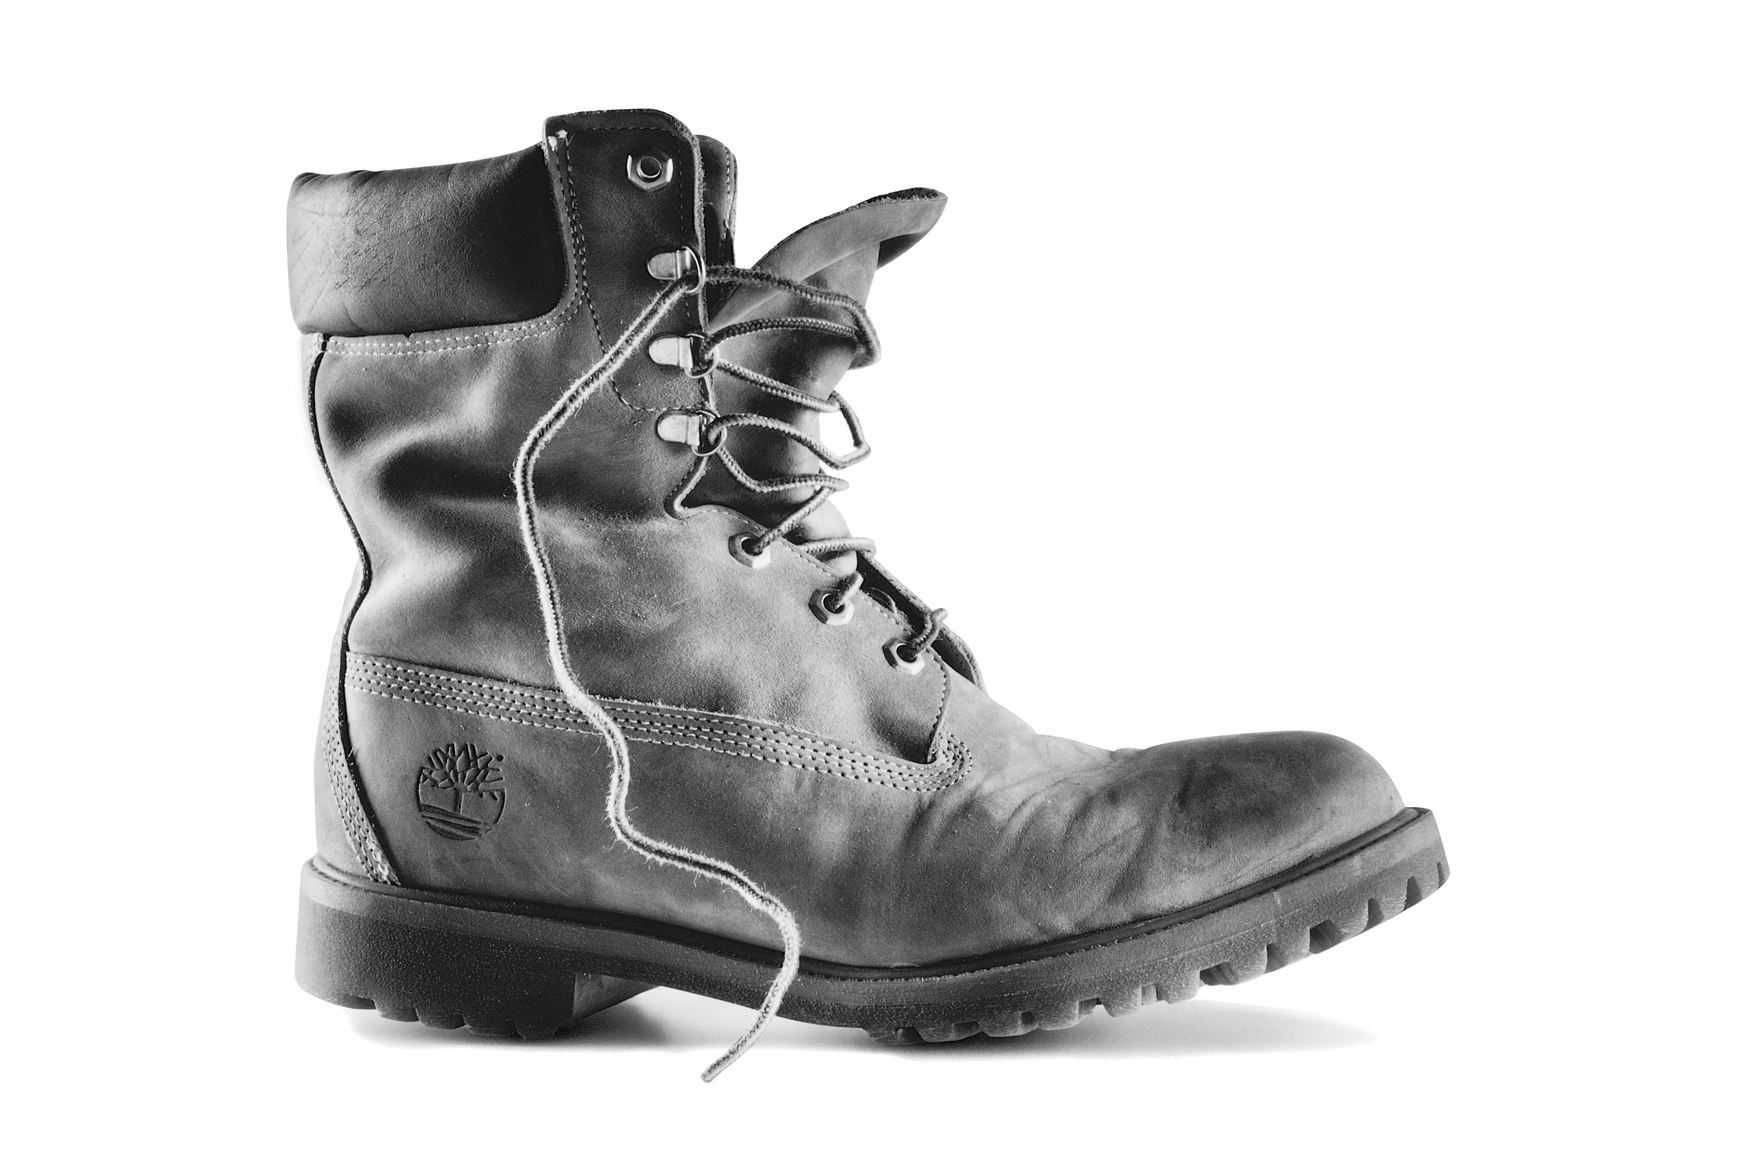 Timberland's boot in 1973